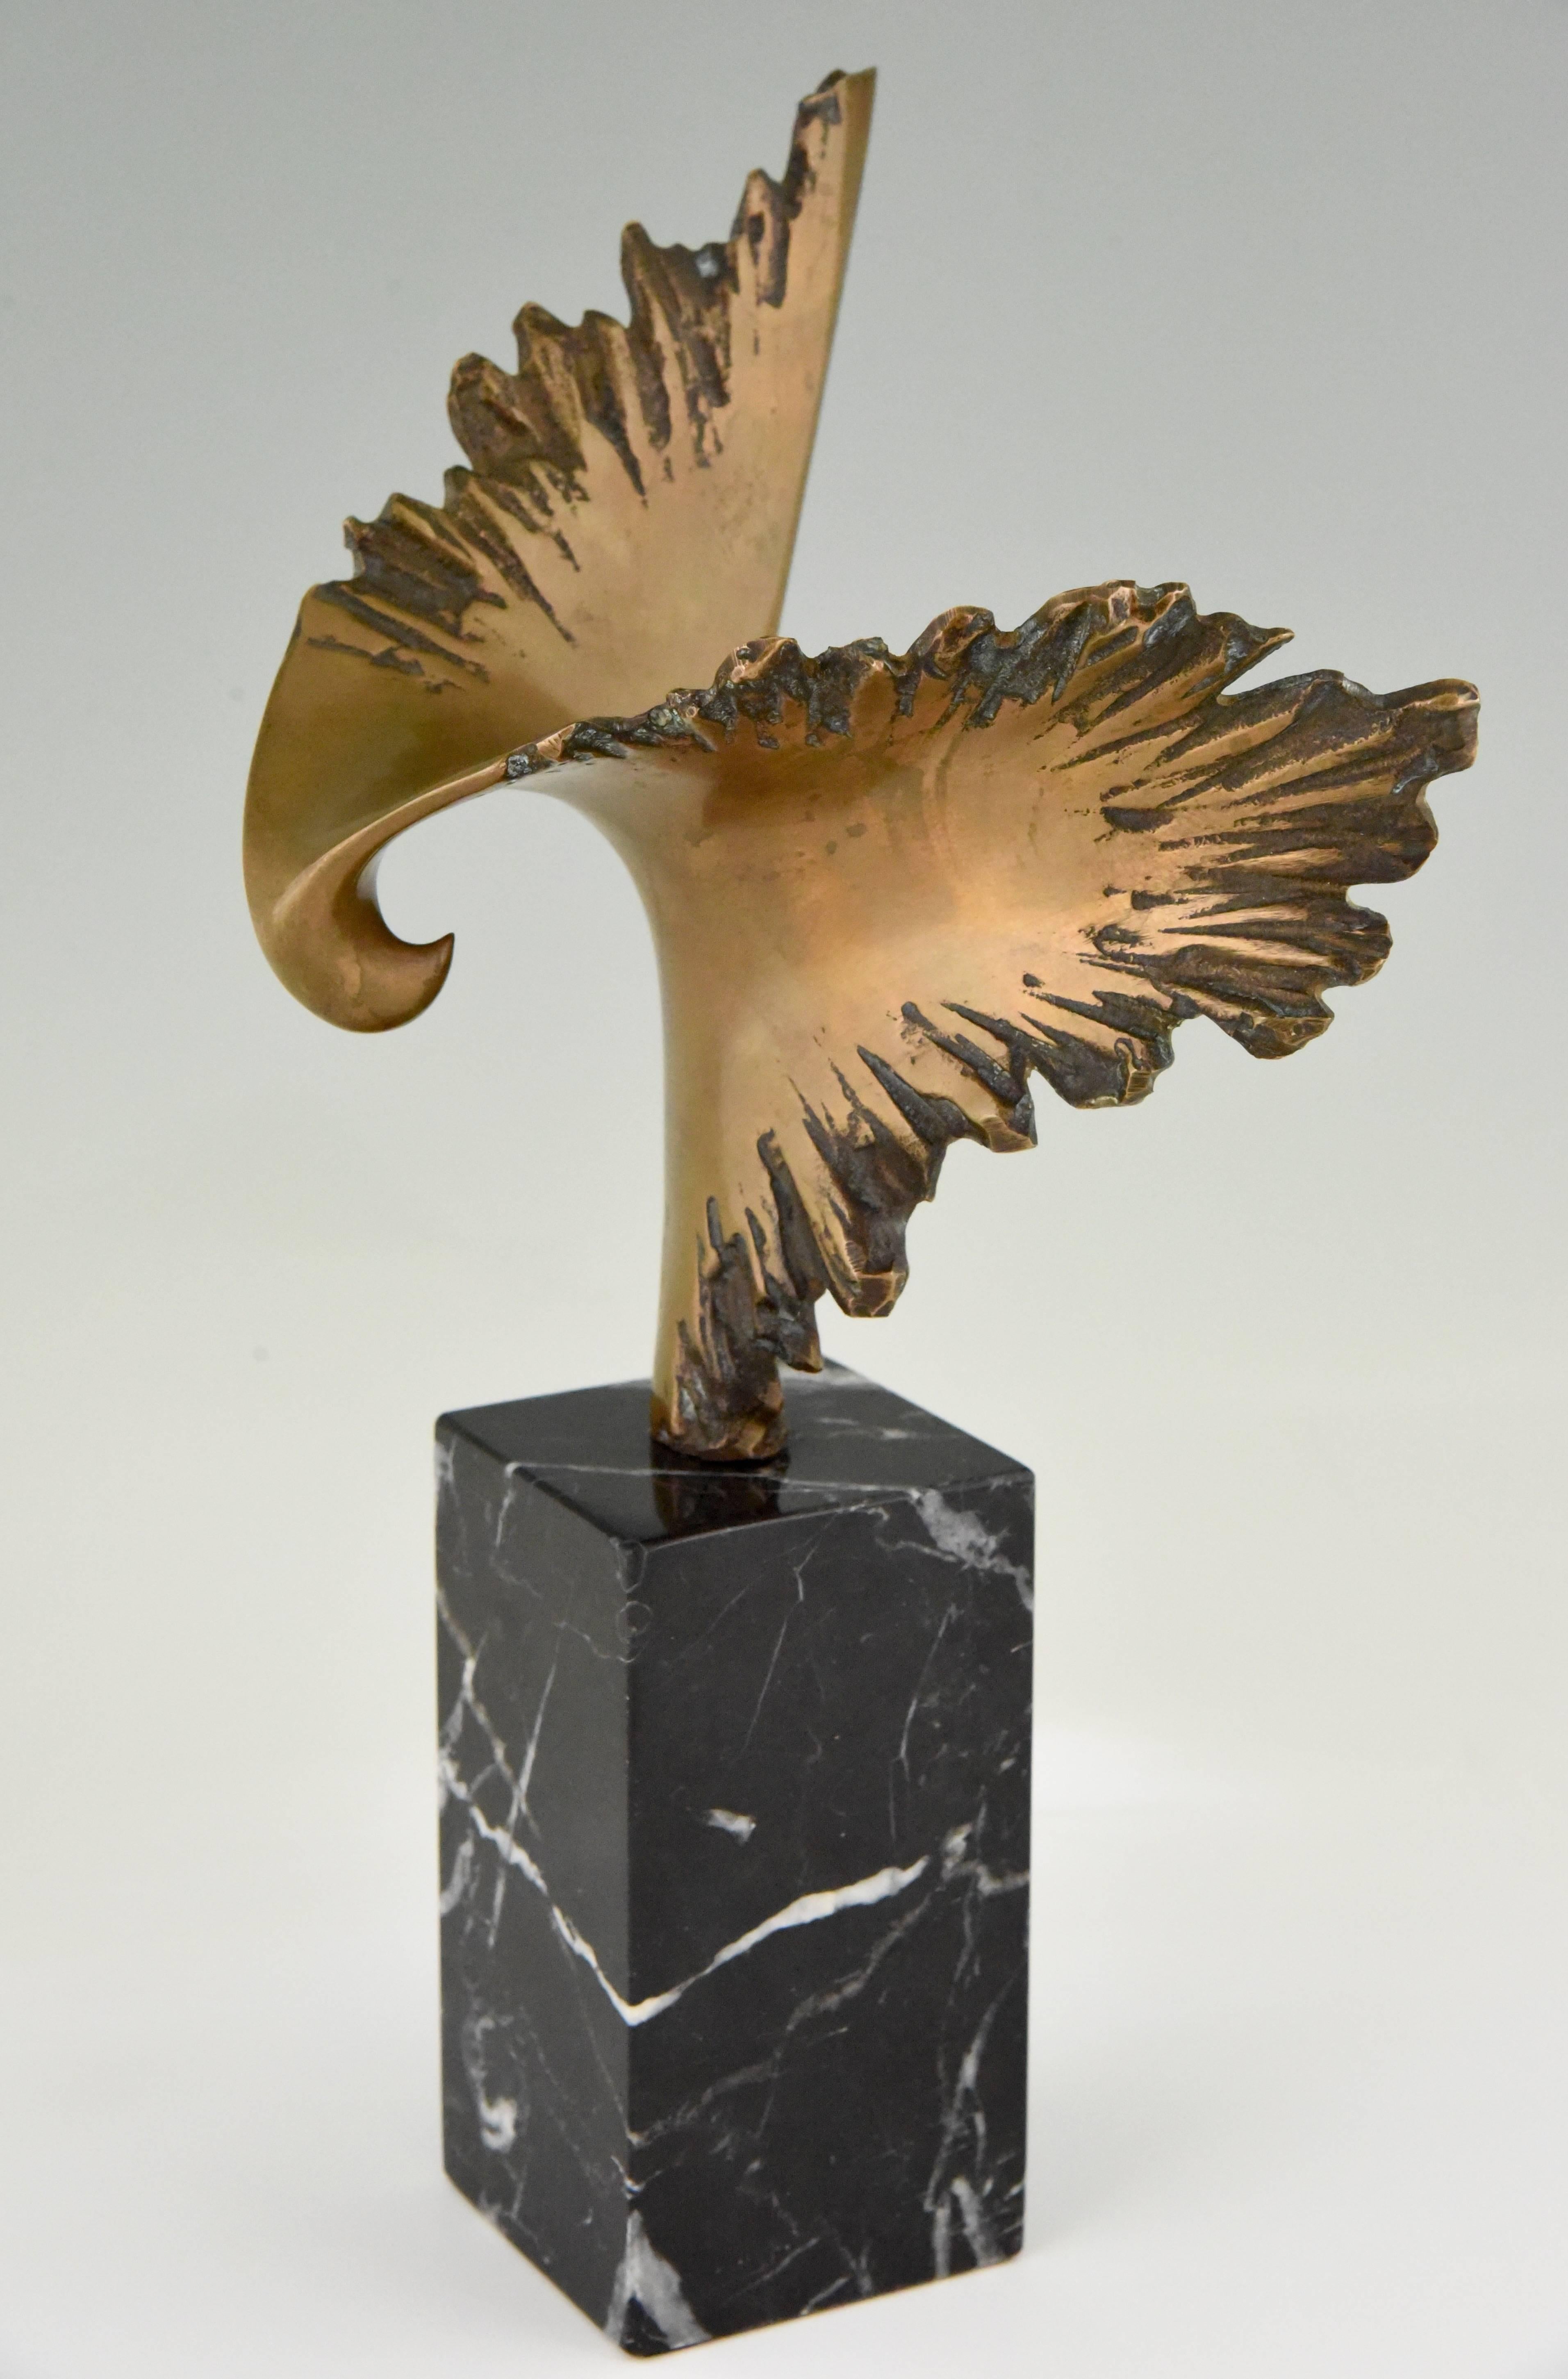 Bronze 1970s sculpture of a stylized eagle
Signature/ Marks: José Luis Pequeno, numbered ?30/50
Style: Mid-Century Modern
Date: 1970
Material: Bronze on marble base.
Origin: Spain
Size: H. 33 cm. x L. 18 cm. x W. 14 cm. ? 
H. 13 inch x L. 7